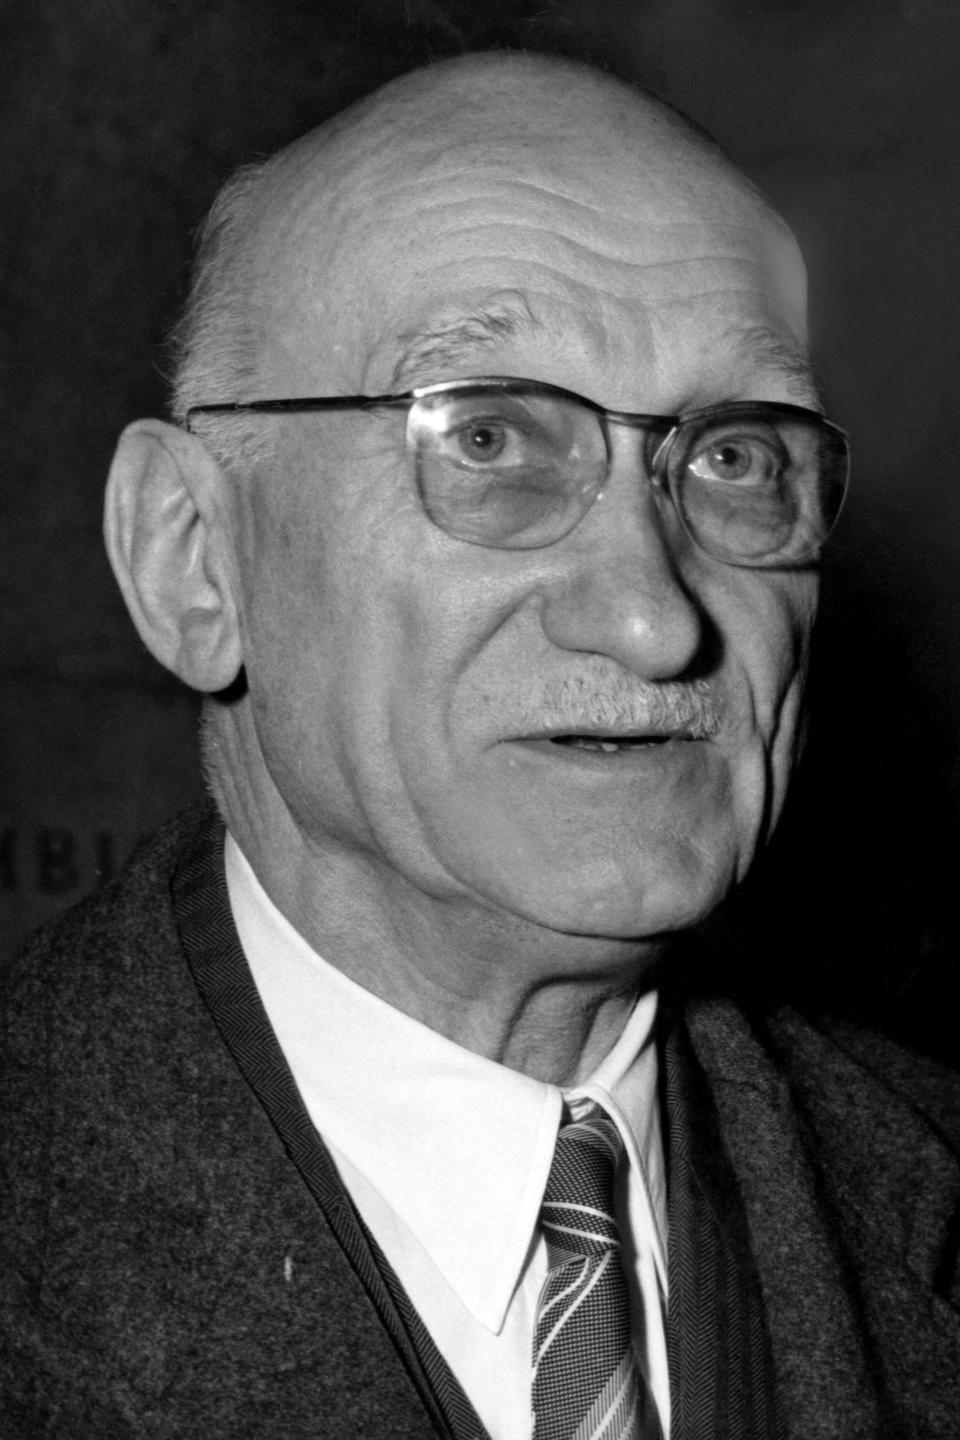 Robert Schuman is shown in this Feb. 19, 1958 photo. Pope Francis has put one of the architects of the plan for European integration, a forerunner of the European Union, on the path to possible sainthood. The Vatican said on Saturday, June 19, 2021 that the pontiff authorized a decree declaring the “heroic virtues” of Robert Schuman, a former French minister and Resistance fighter in World War II, who died in 1963 and who had been president of the European Parliament from 1958 till 1960. (AP Photo)